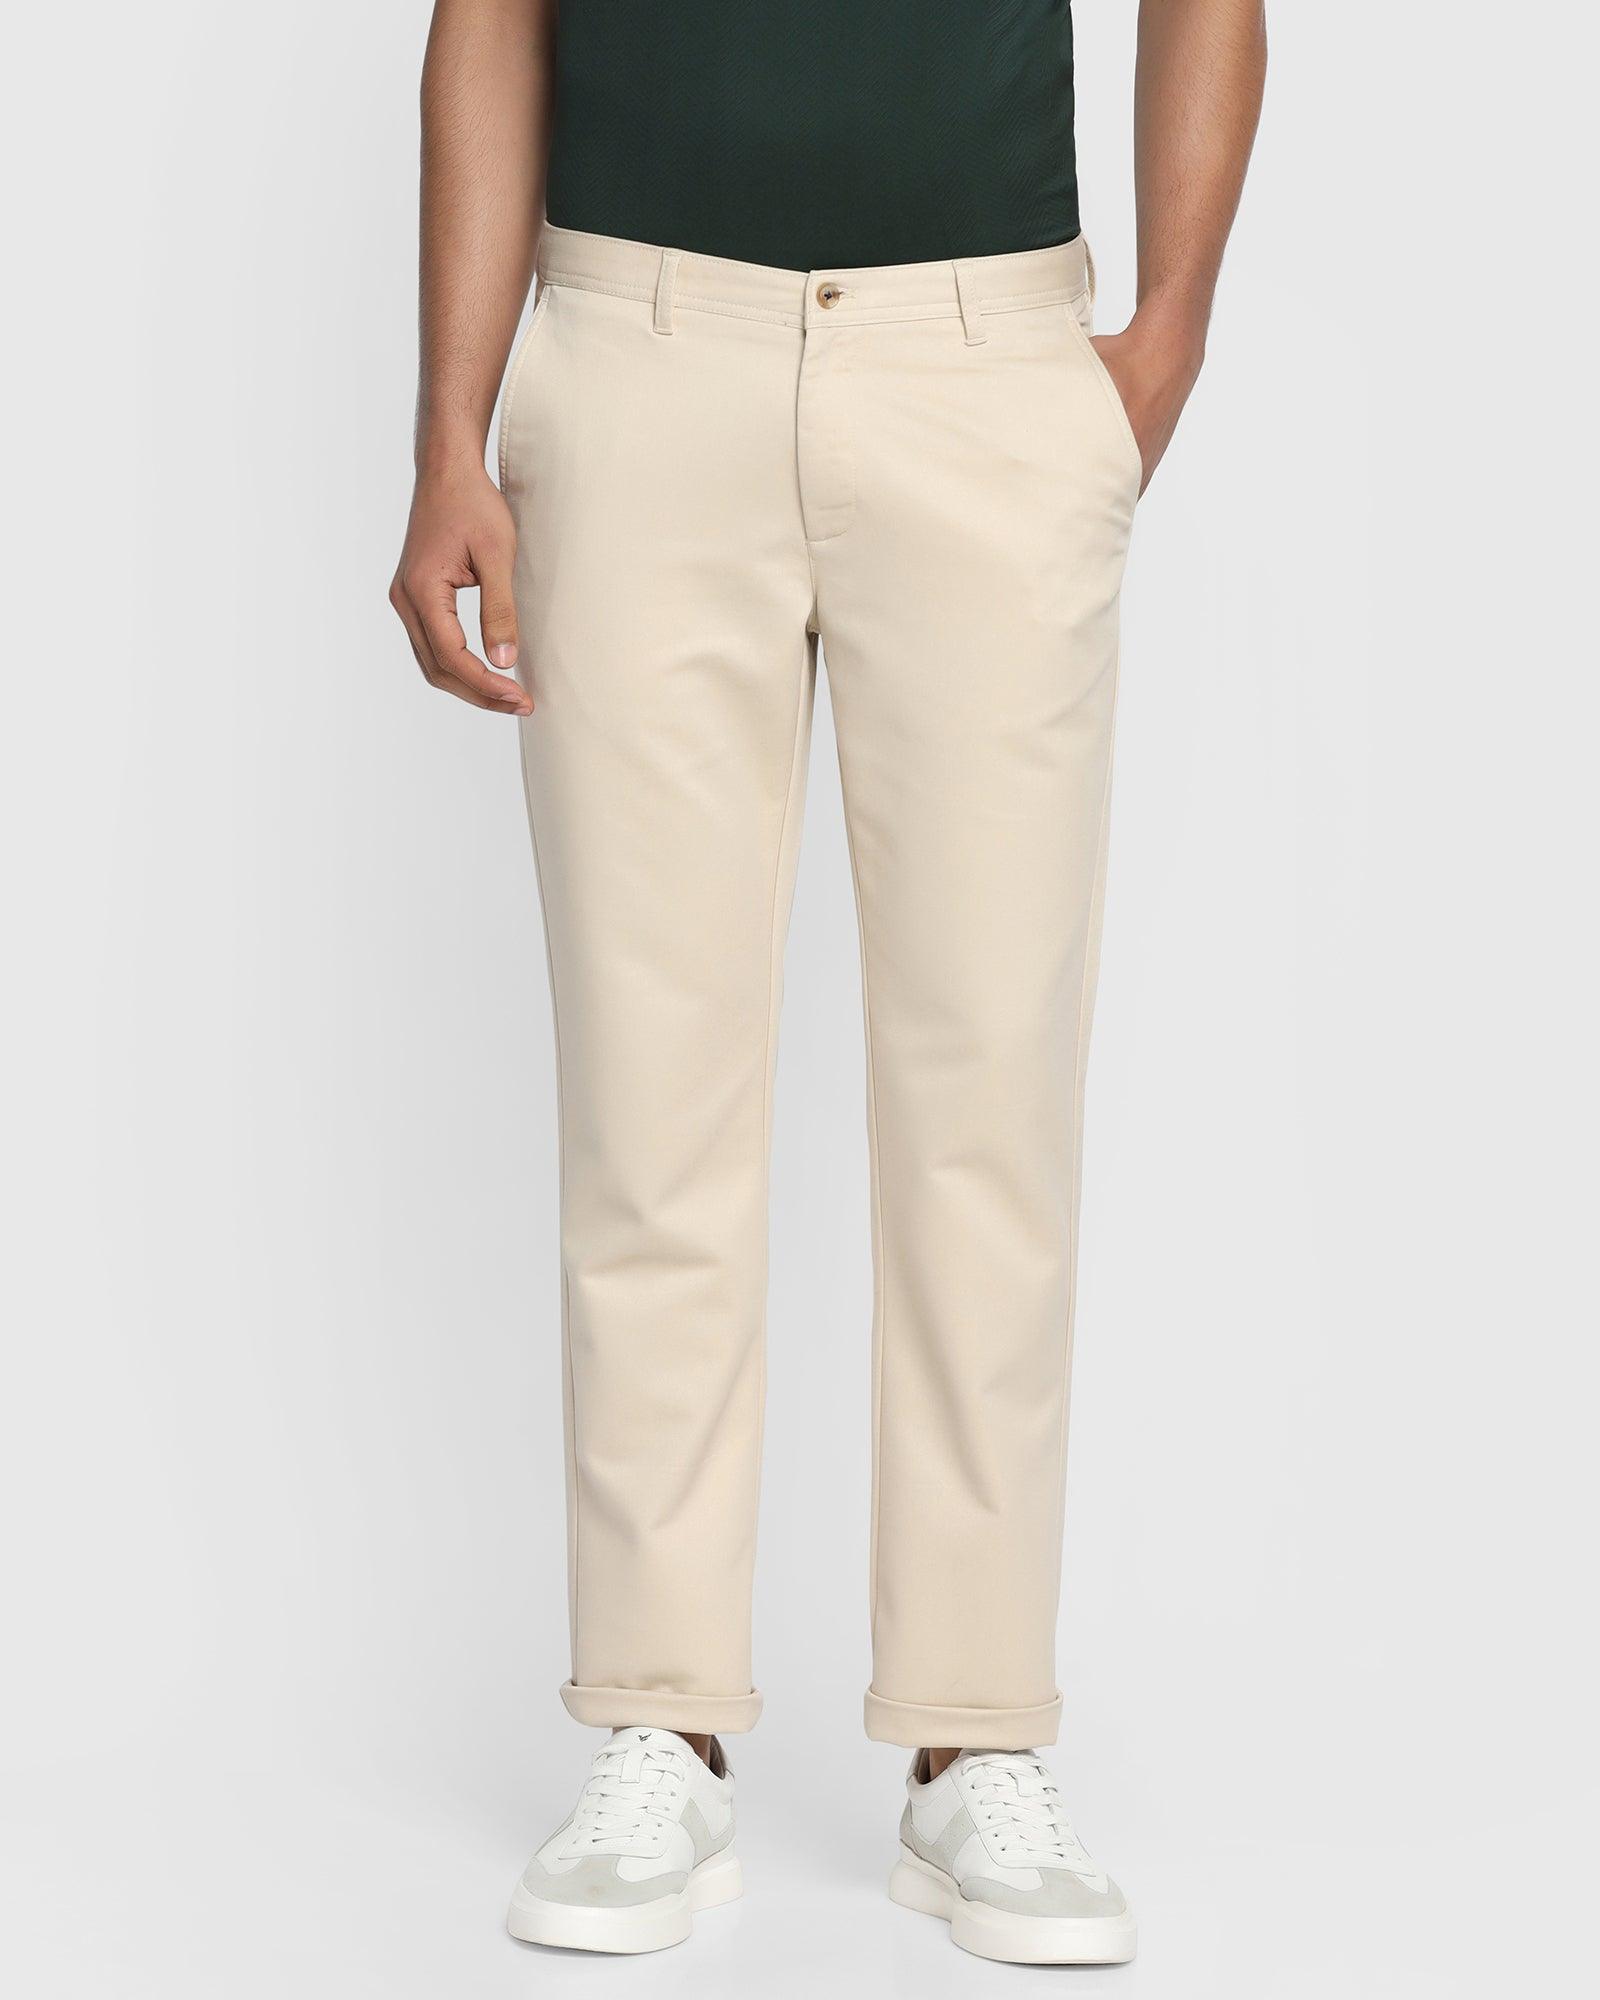 Straight B-90 Casual Beige Solid Khakis - Clate